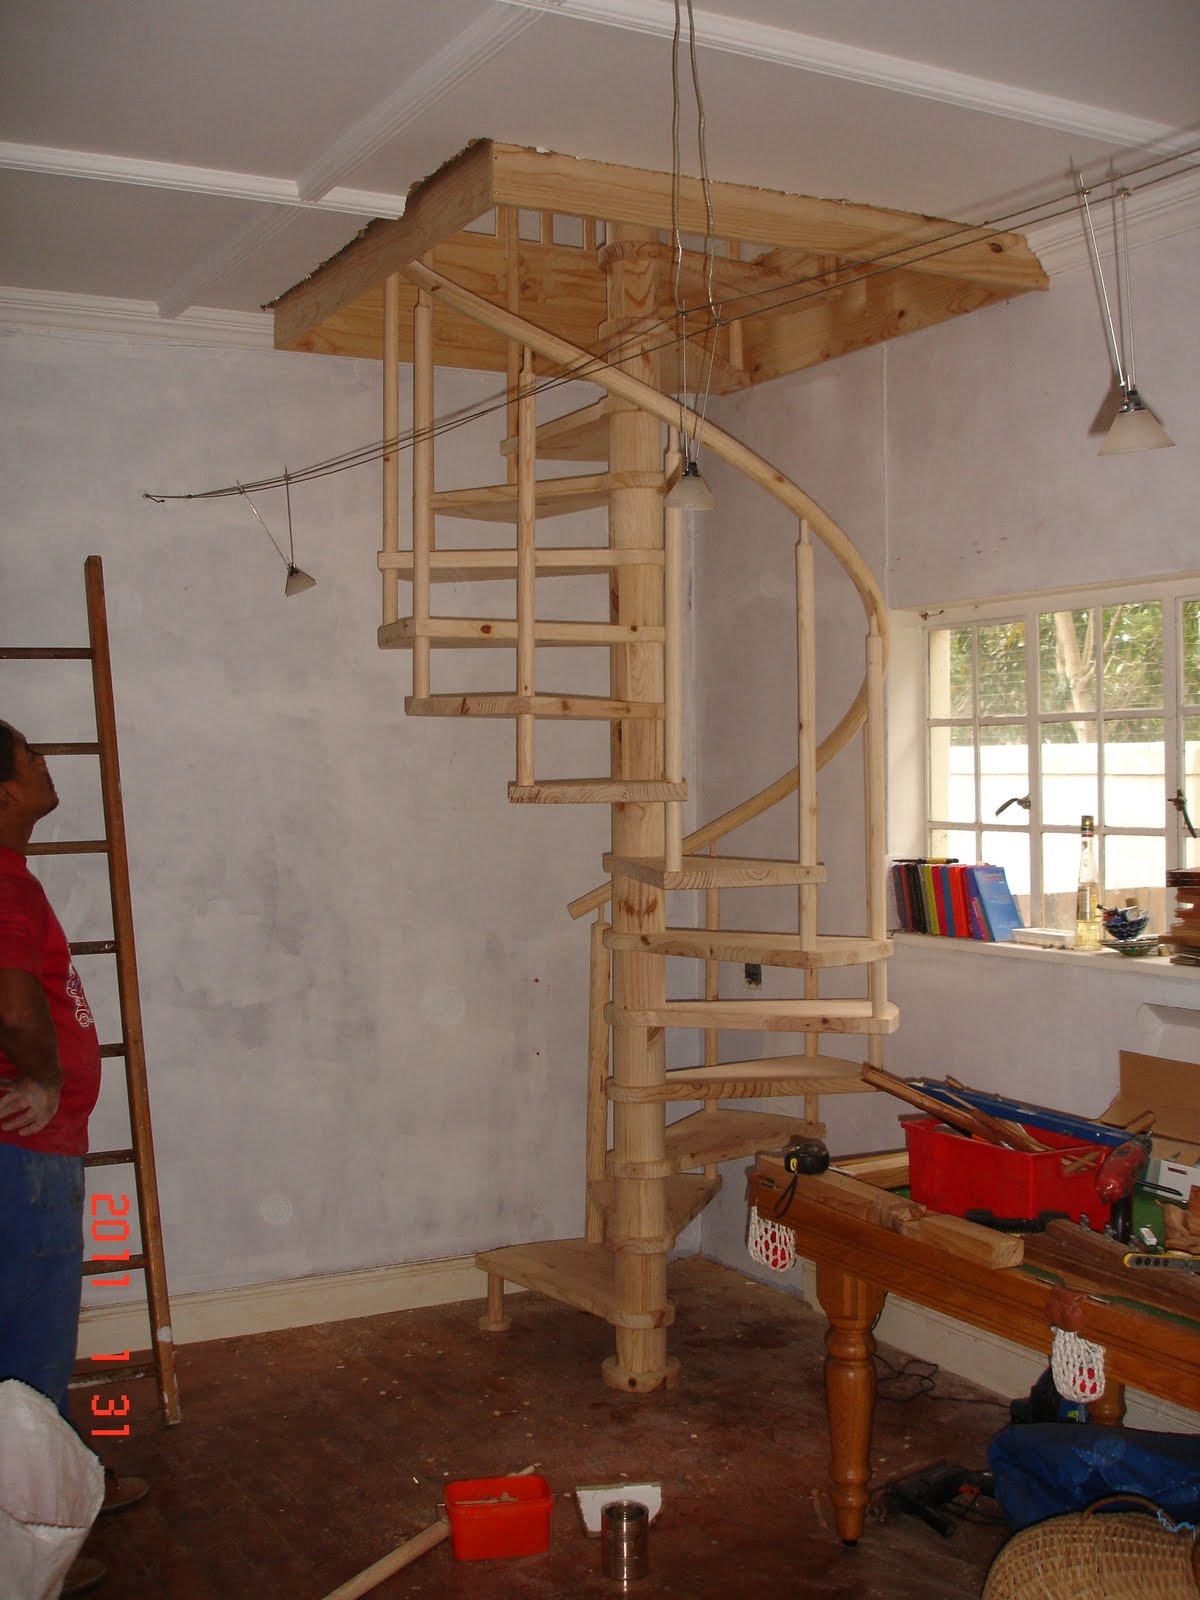 DIY Wood Spiral Staircase
 Cape Stairs D I Y Spiral Staircase with round balusters